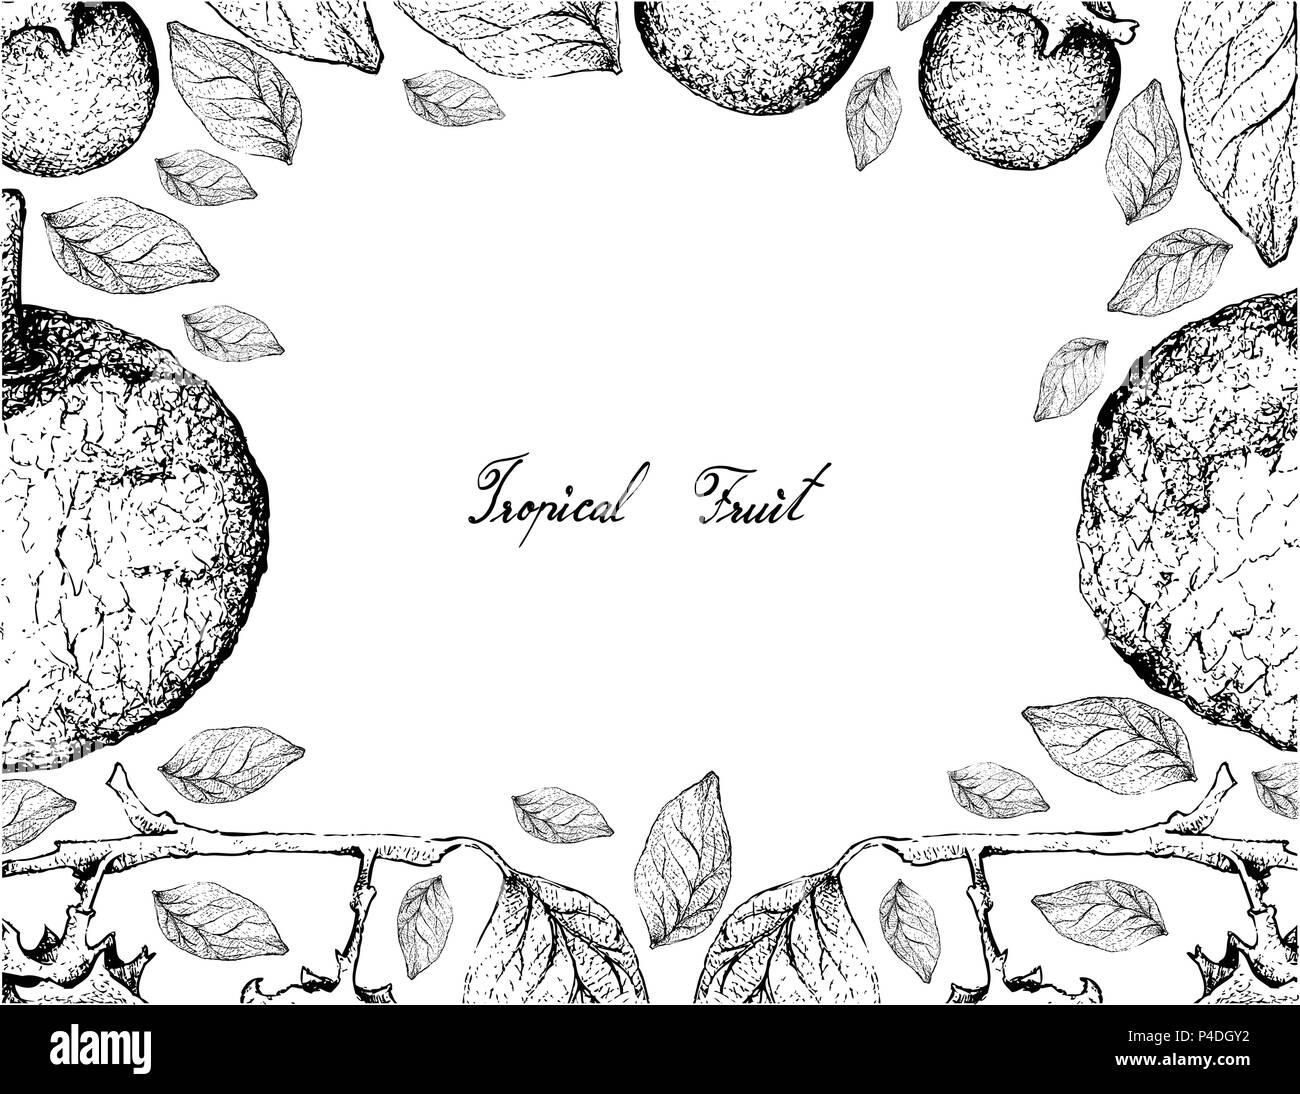 Tropical Fruit, Illustration Frame of Hand Drawn Sketch of Feroniella Lucida and Ebony or Diospyros Rhodocalyx Fruits Isolated on White Background. Stock Vector